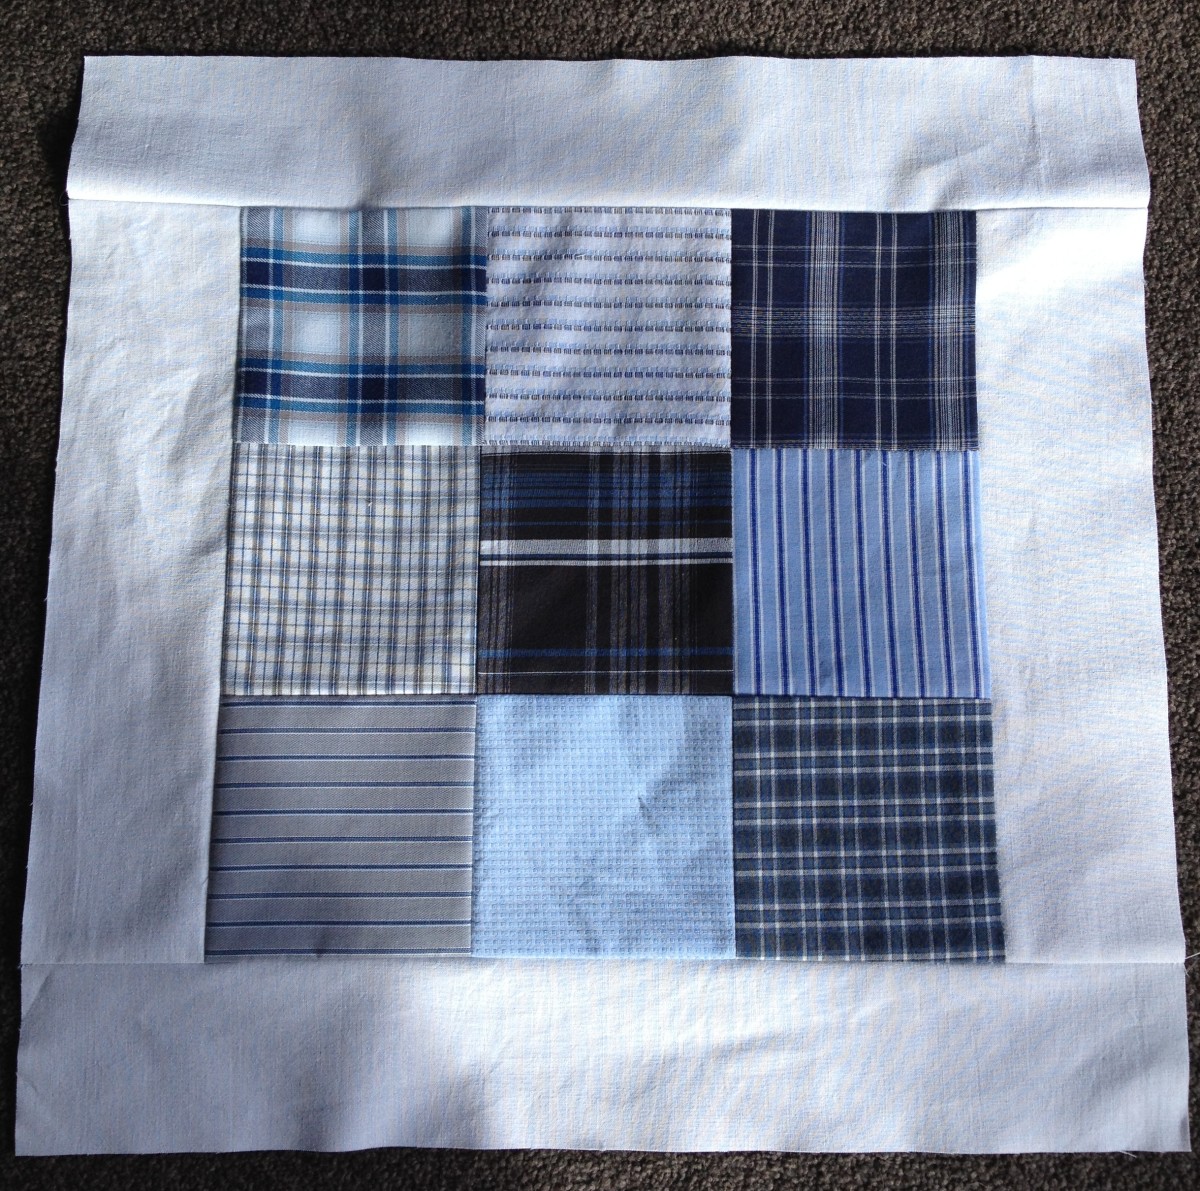 Quilting With Recycled Men's Shirts